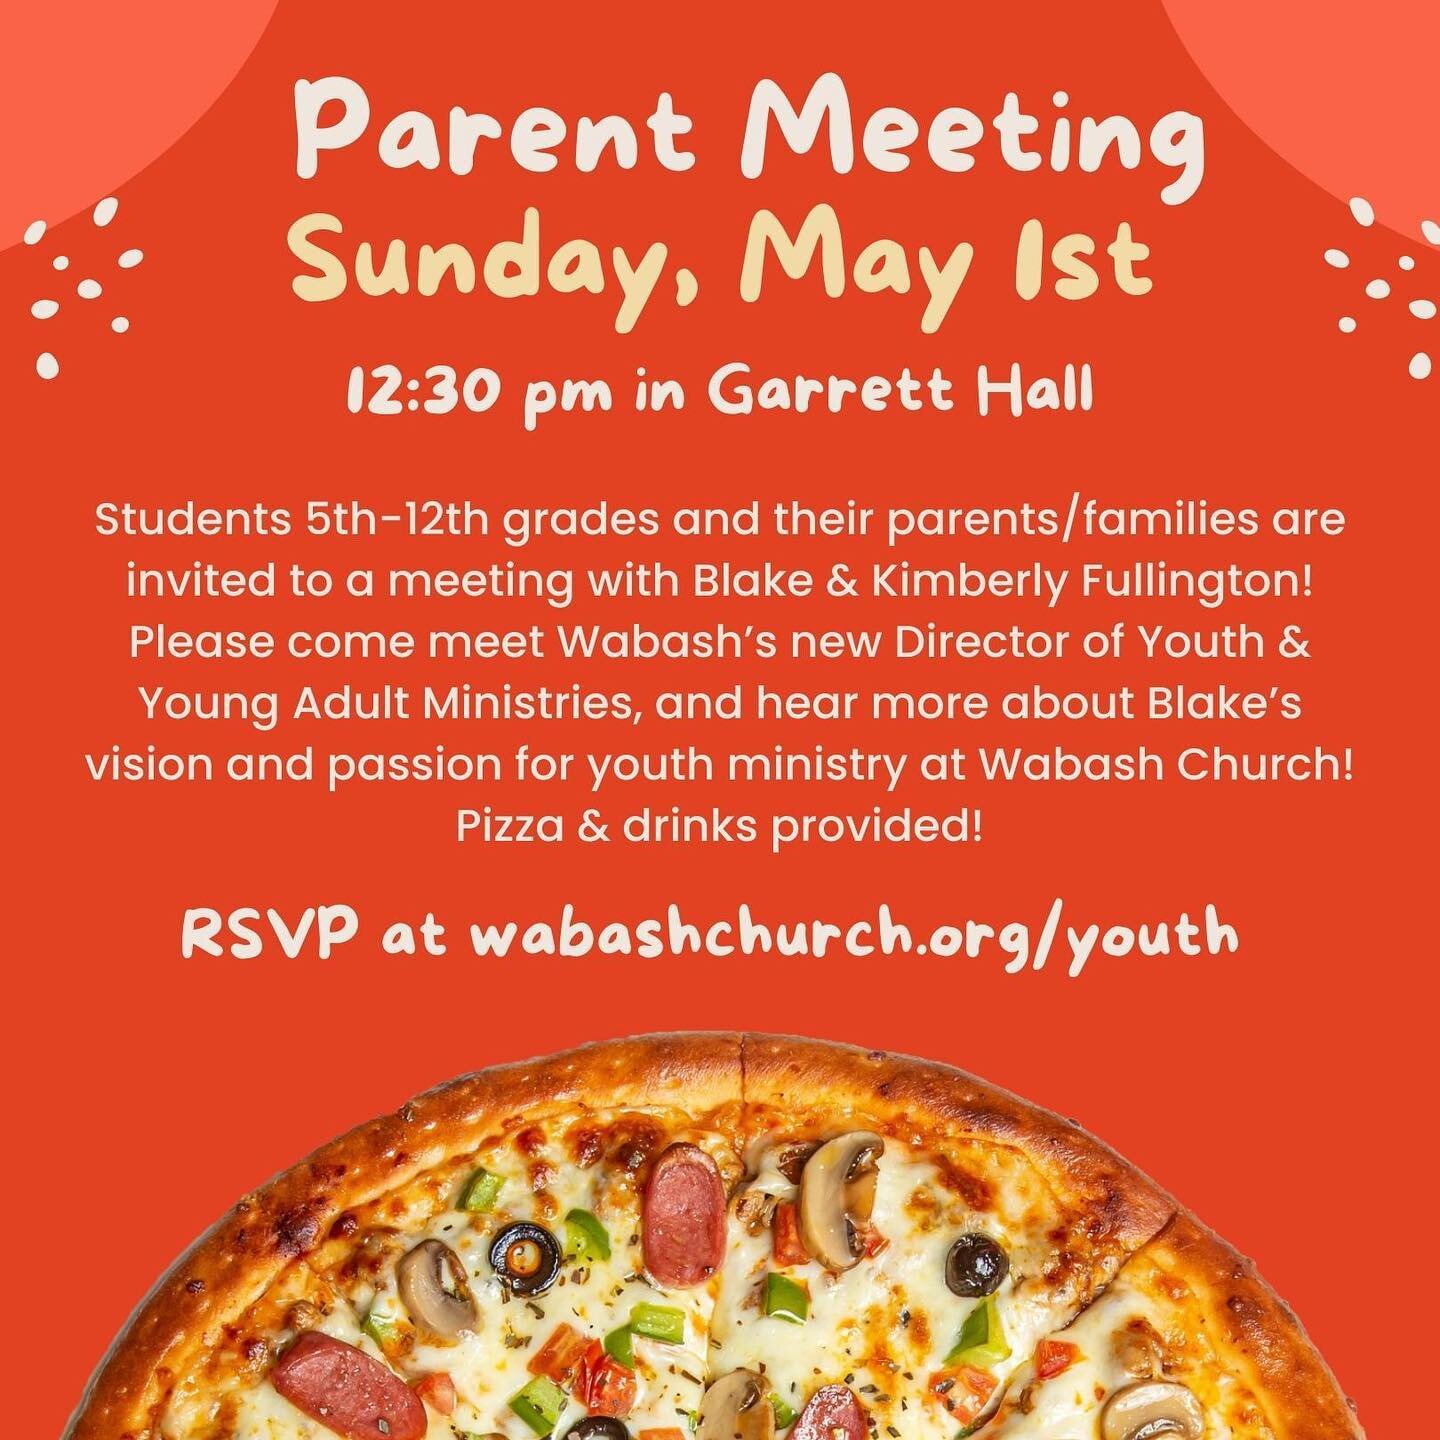 You&rsquo;re invited to a parent meeting on Sunday, May 1st from 12:30 to 1:30 PM in Garrett Hall. If you have a student from 5th to 12th grade, this meeting is for you and your family! The goal is just to provide some time for you to get to know Kim